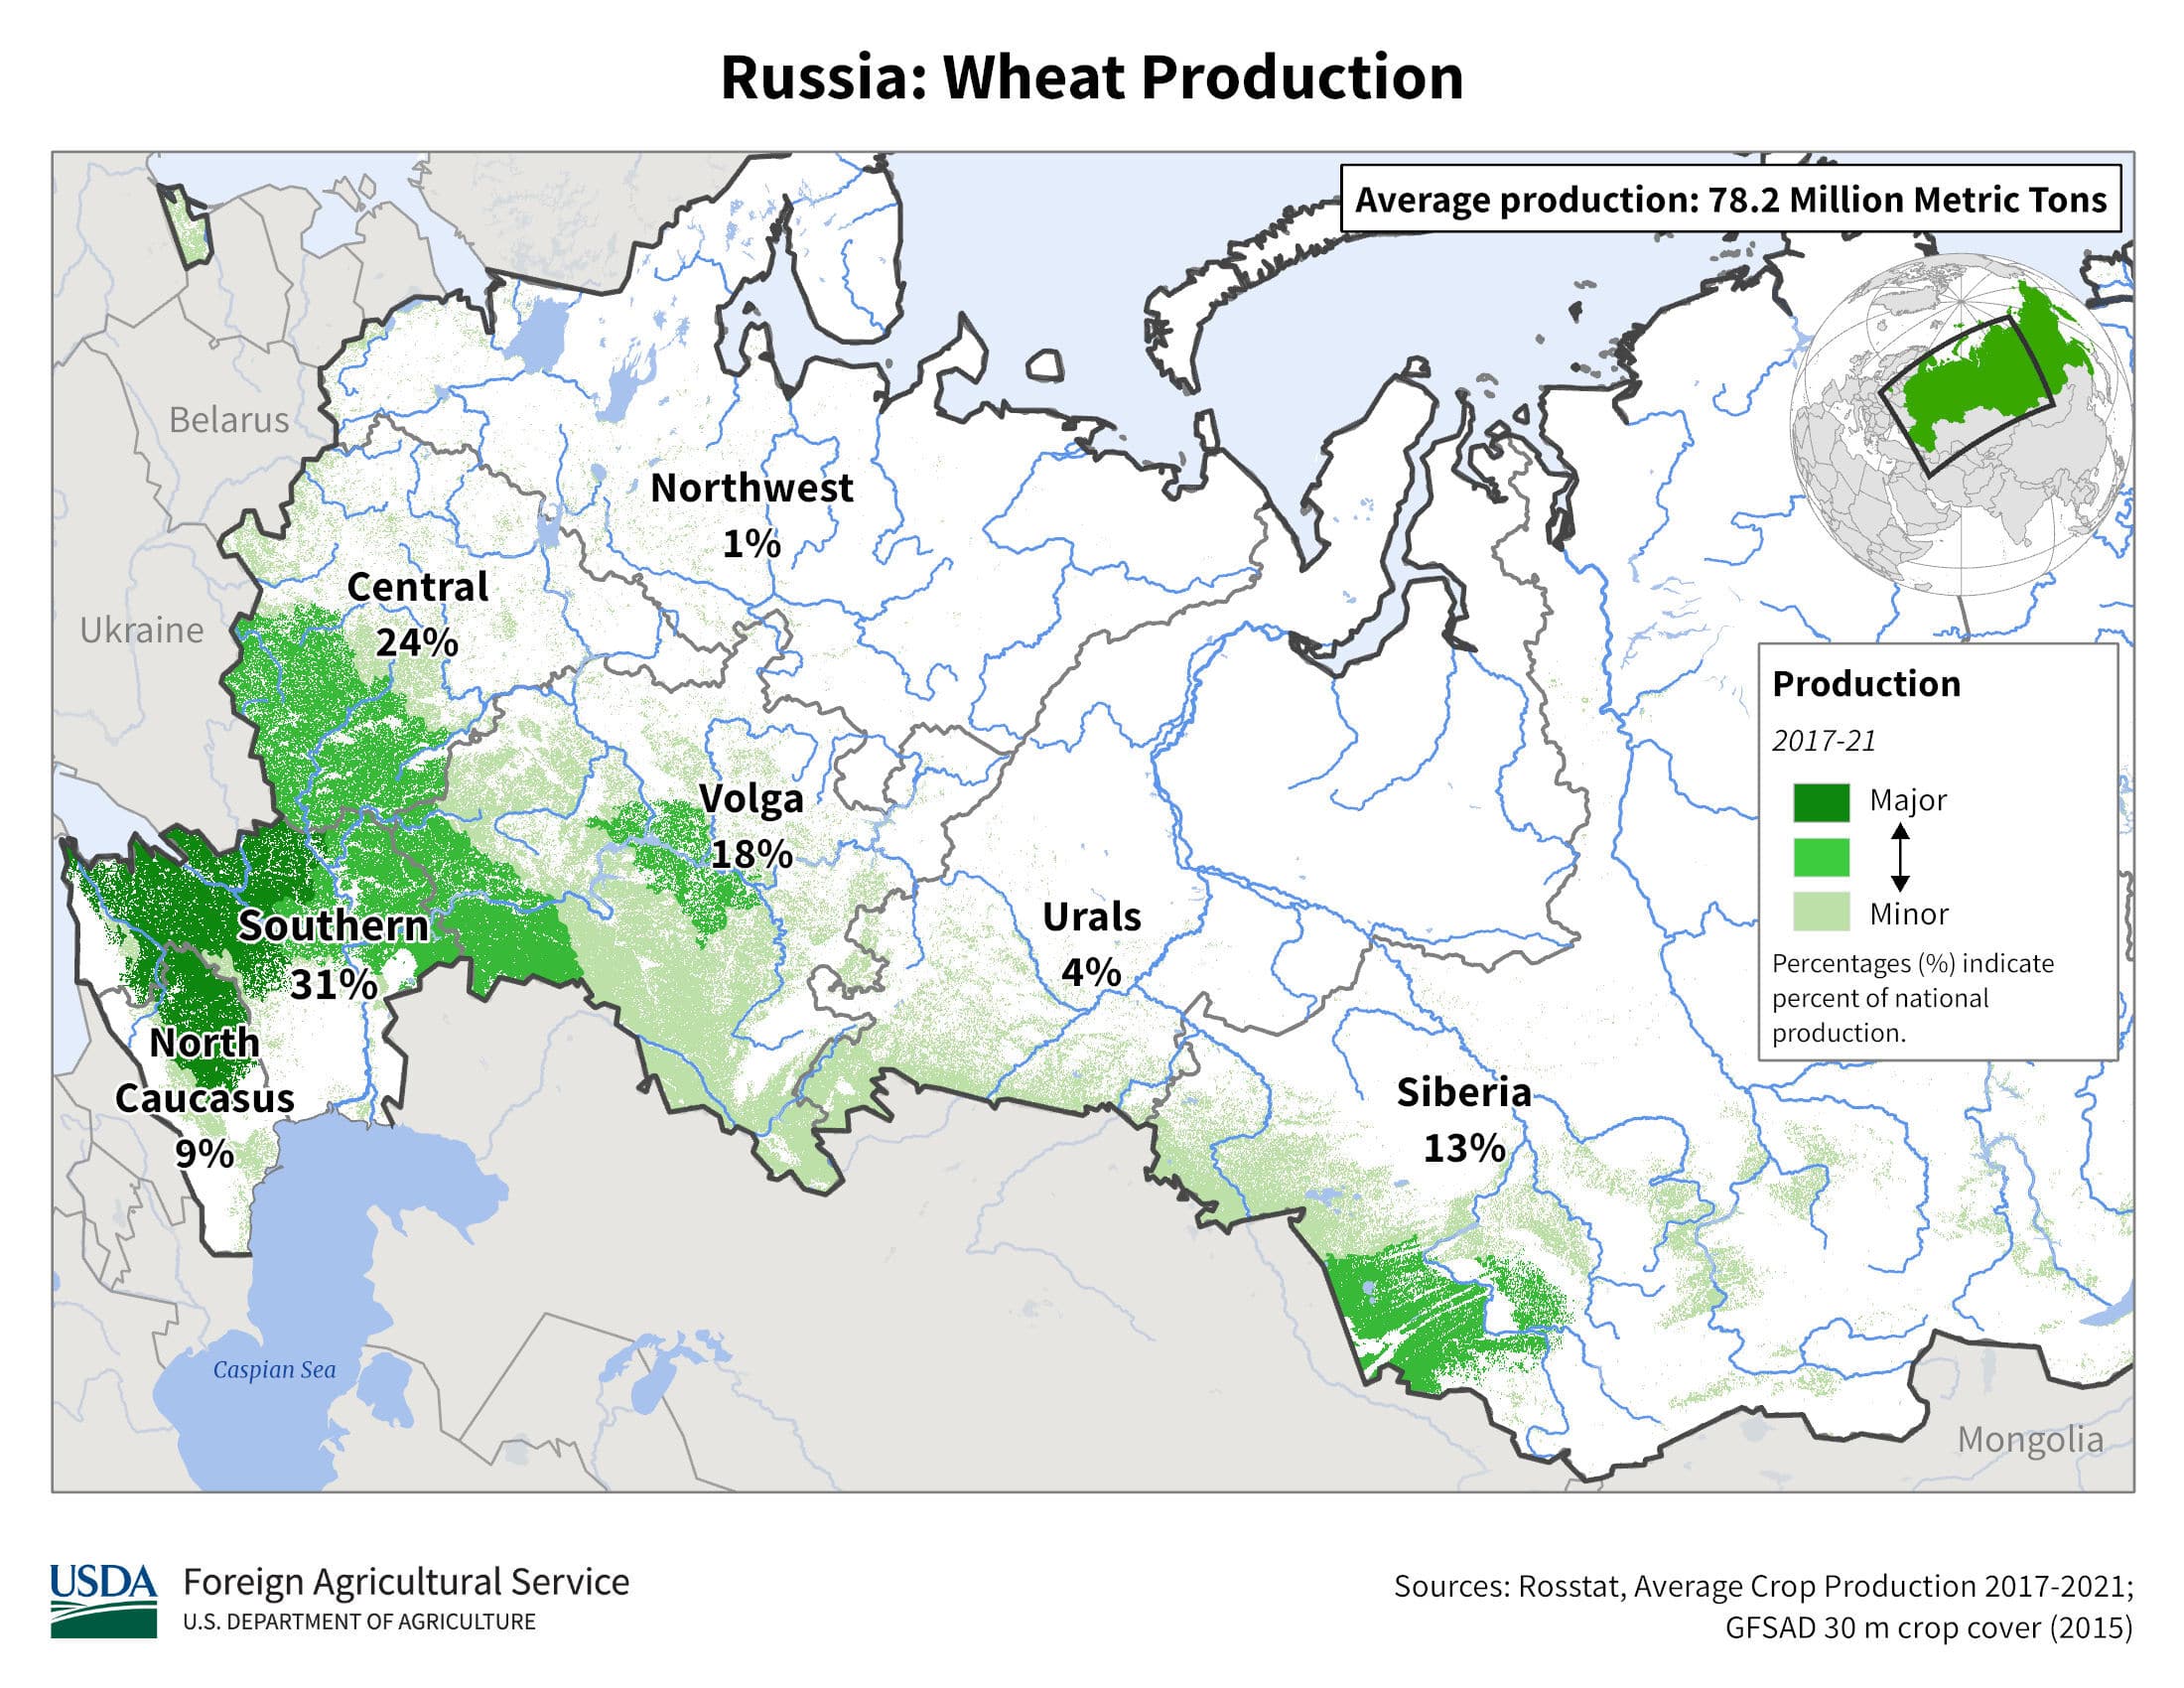 Wheat production in Russia, by region. Source: International Production Assessment Division.